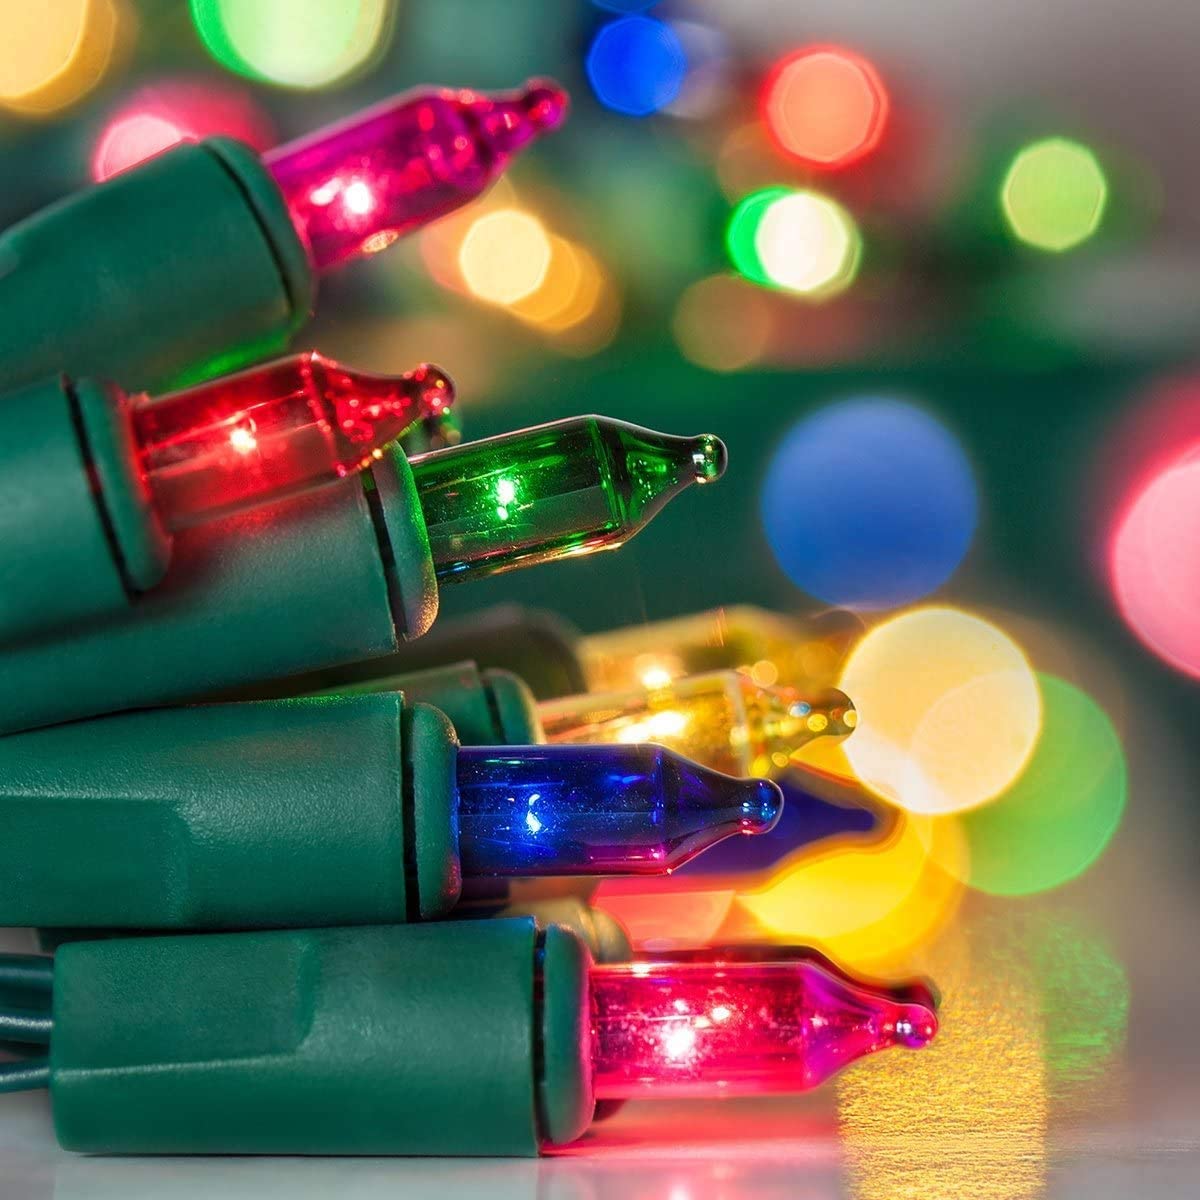 100 Indoor/Outdoor Multi-Color Musical Christmas Lights - Plays 25 Classical Holiday Songs - 8 Function Chaser - Green Wire - 26 Ft Wire Length, 2" Space Between Bulbs